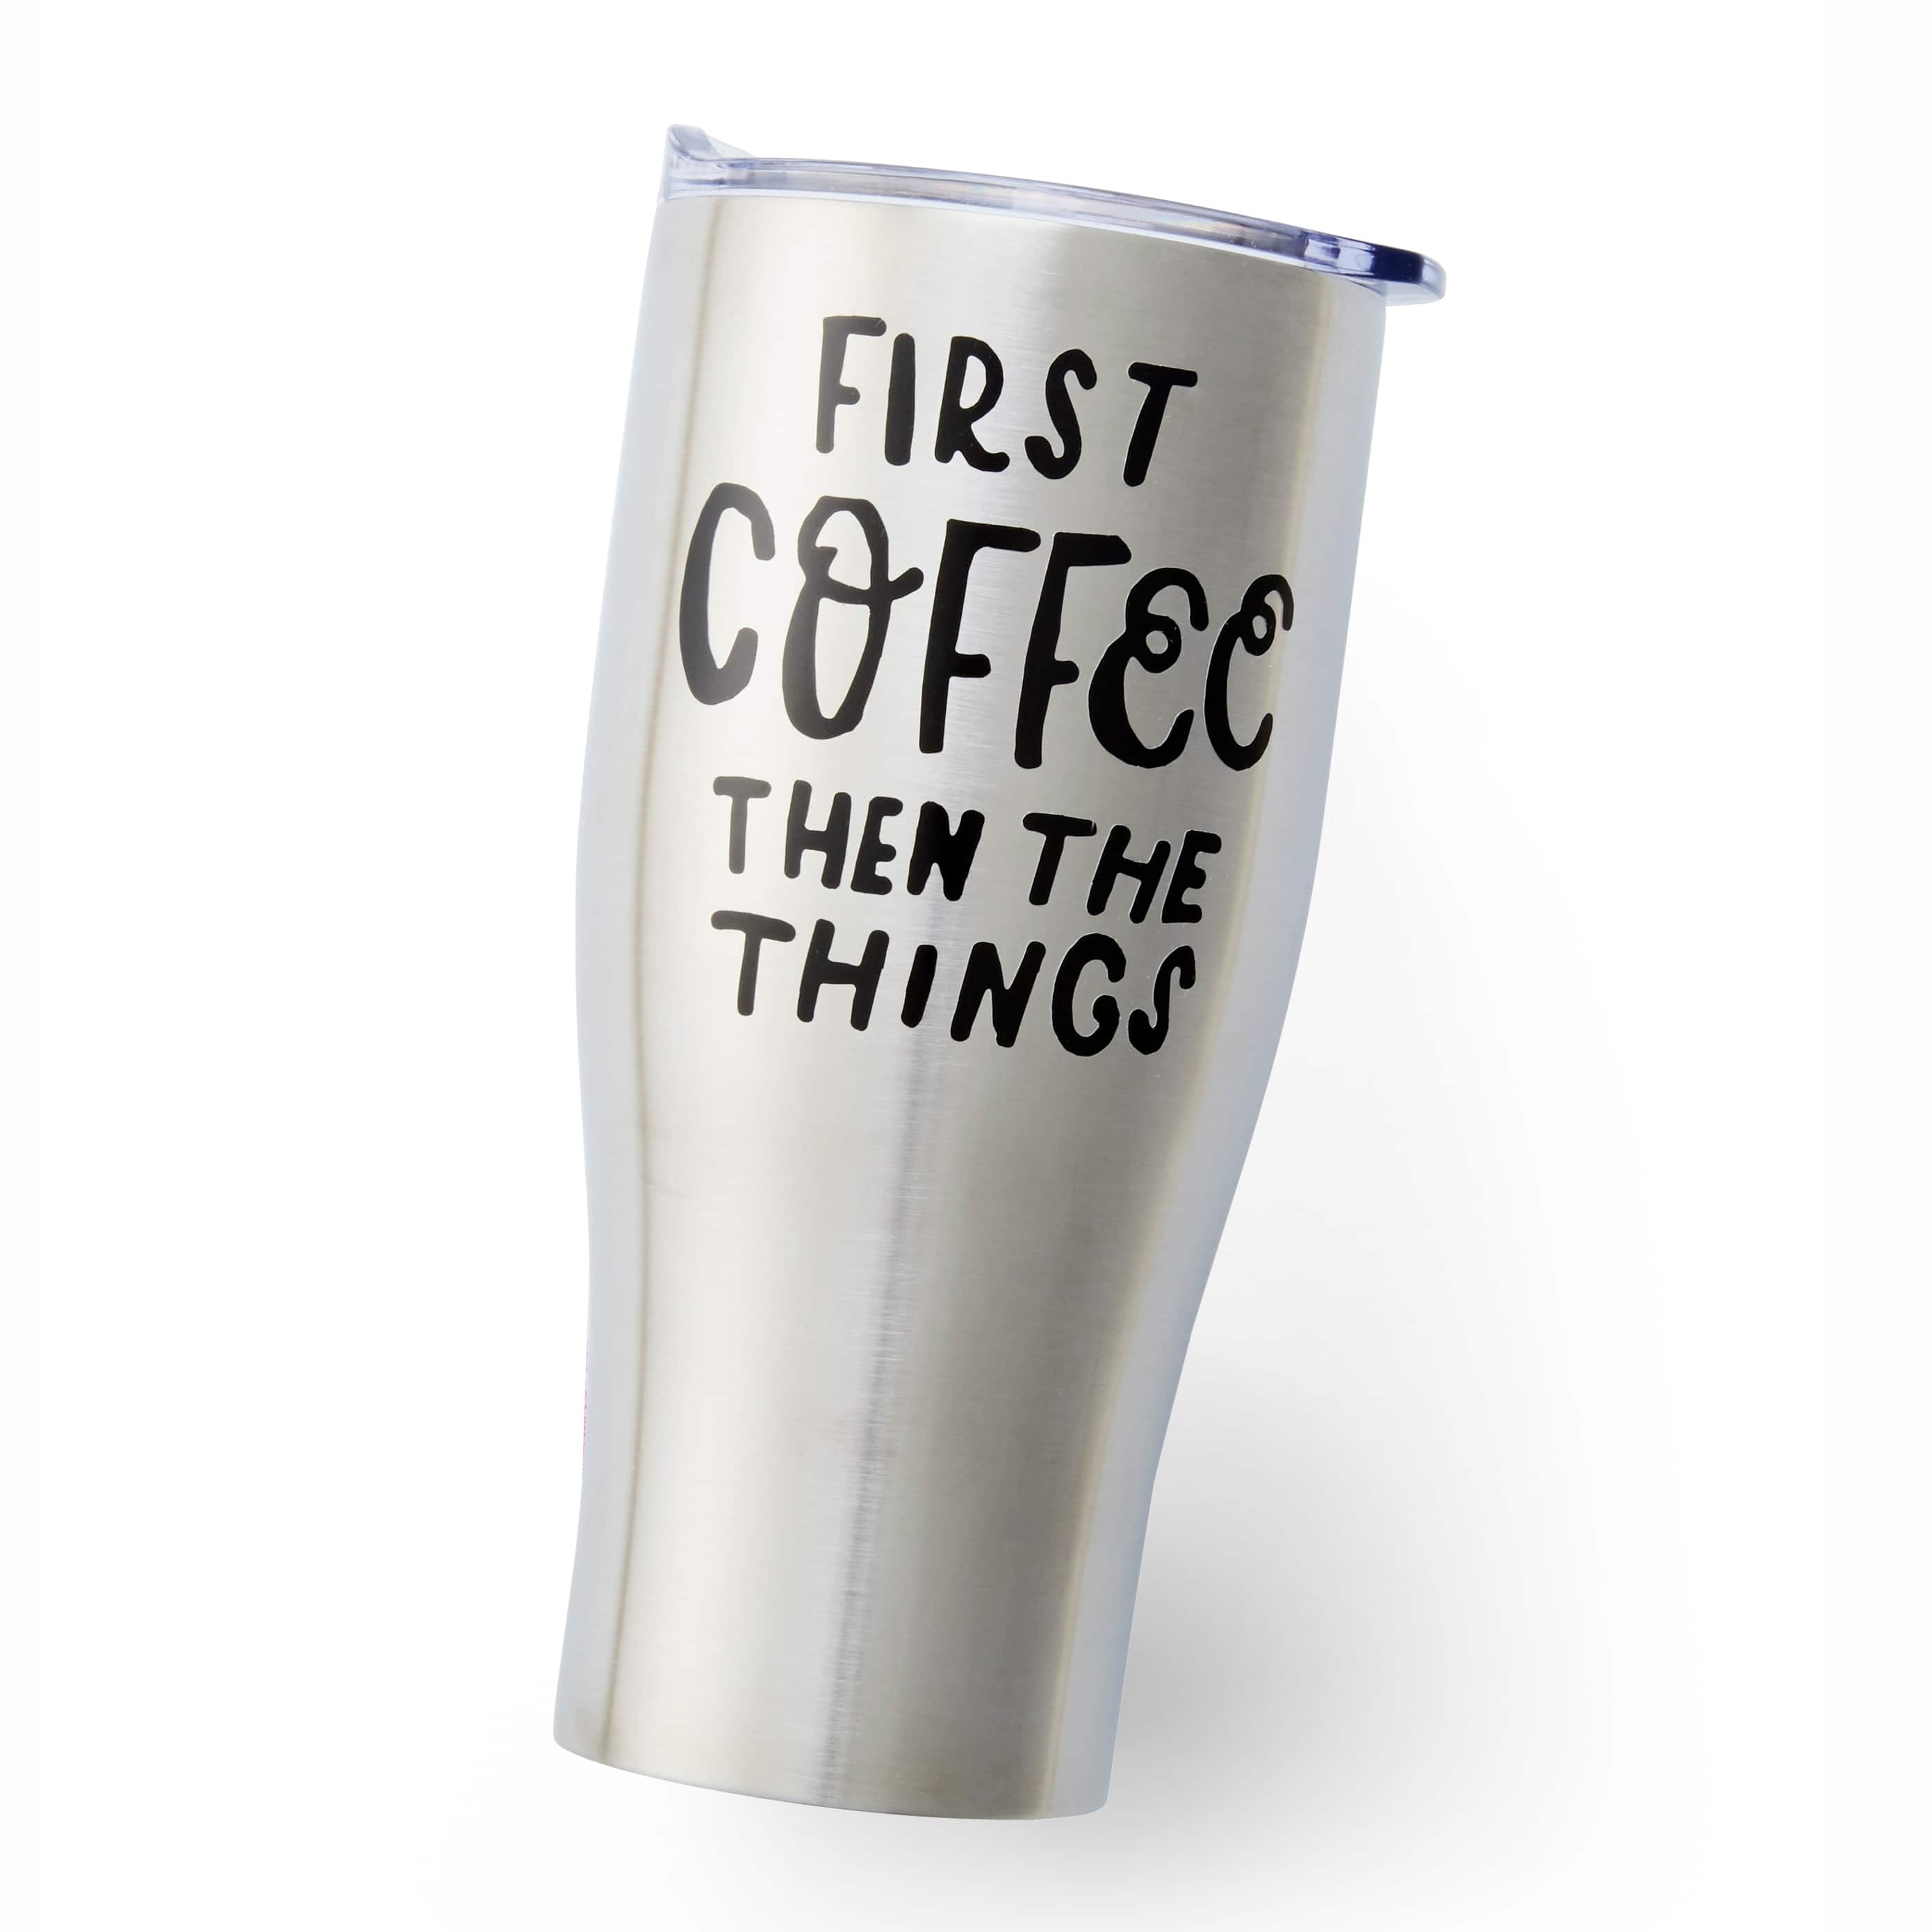 Created with a Purpose Stainless Steel Tumbler